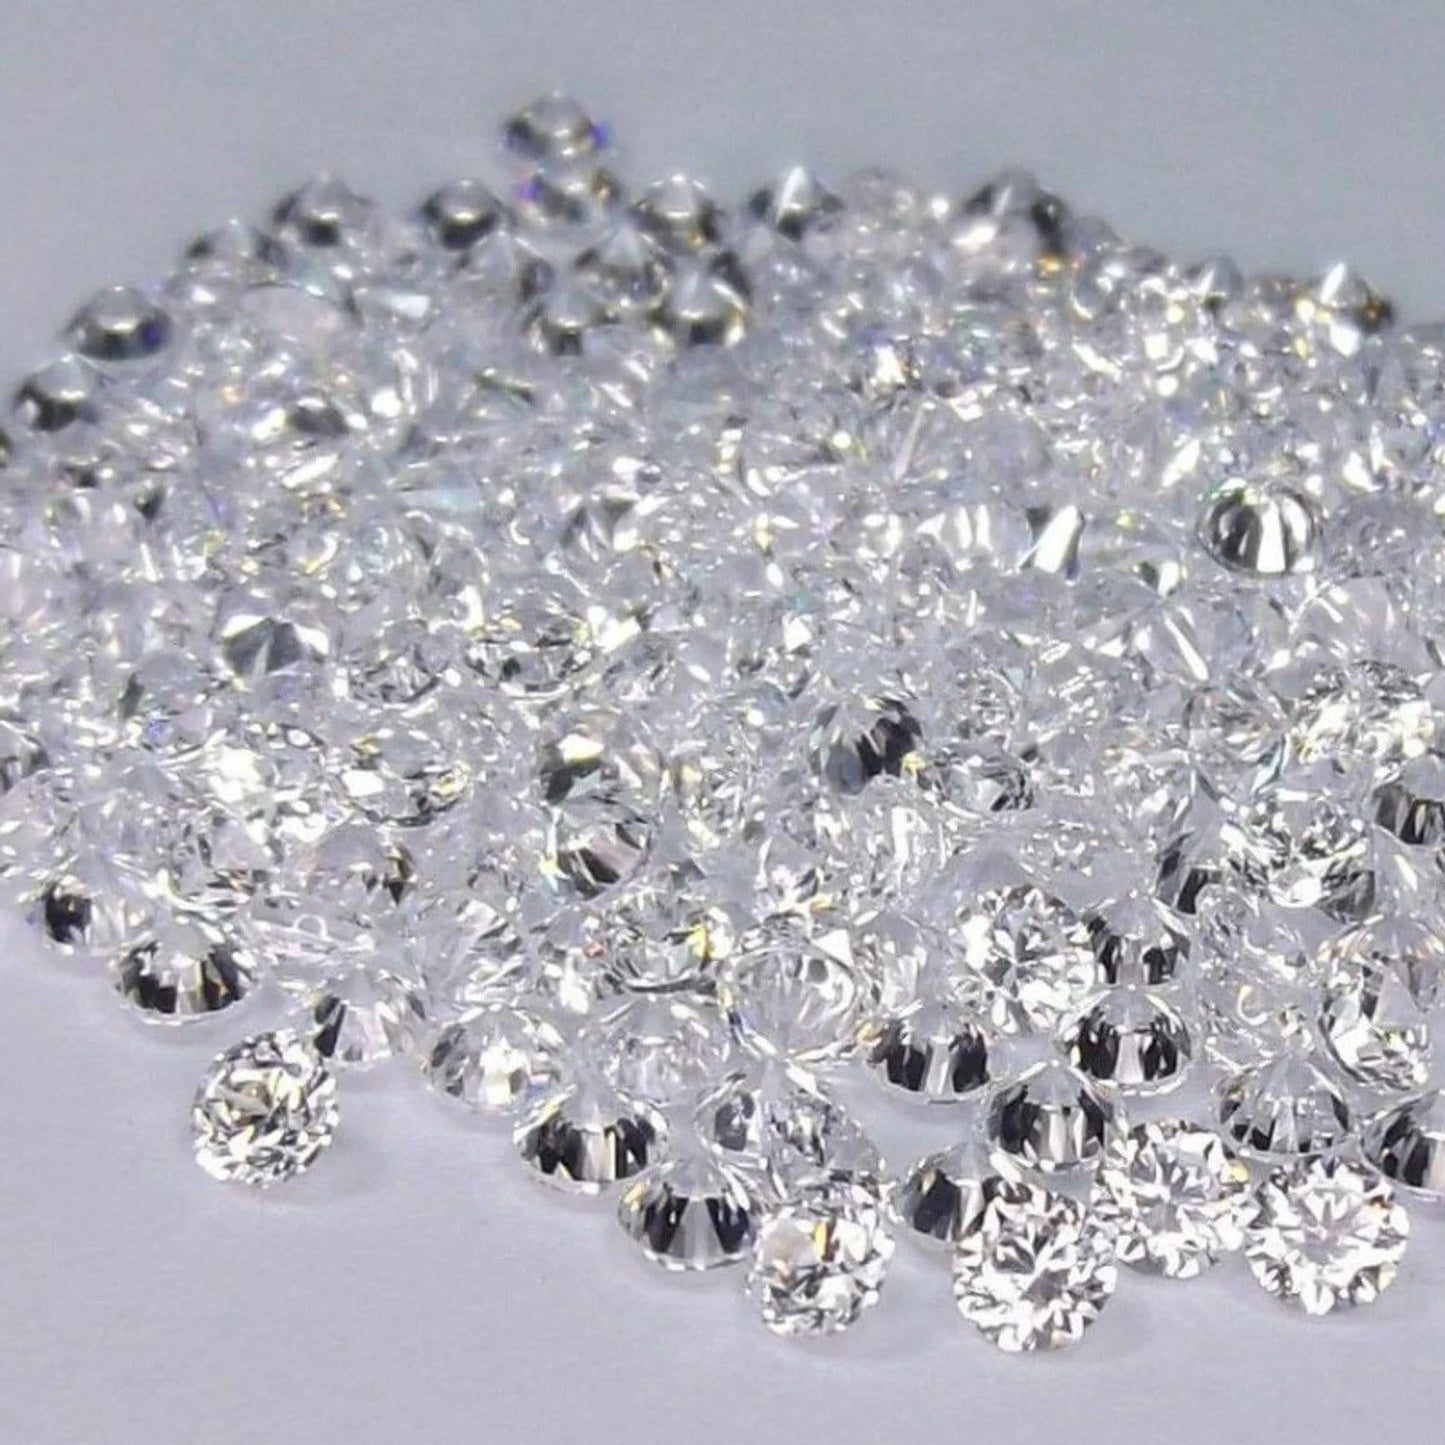 0.70mm to 4mm Full White D Color Small Round Brilliant Diamond Cut Loose Moissanite For Ring, Earring, Jewelry Making (Wholesale Price)